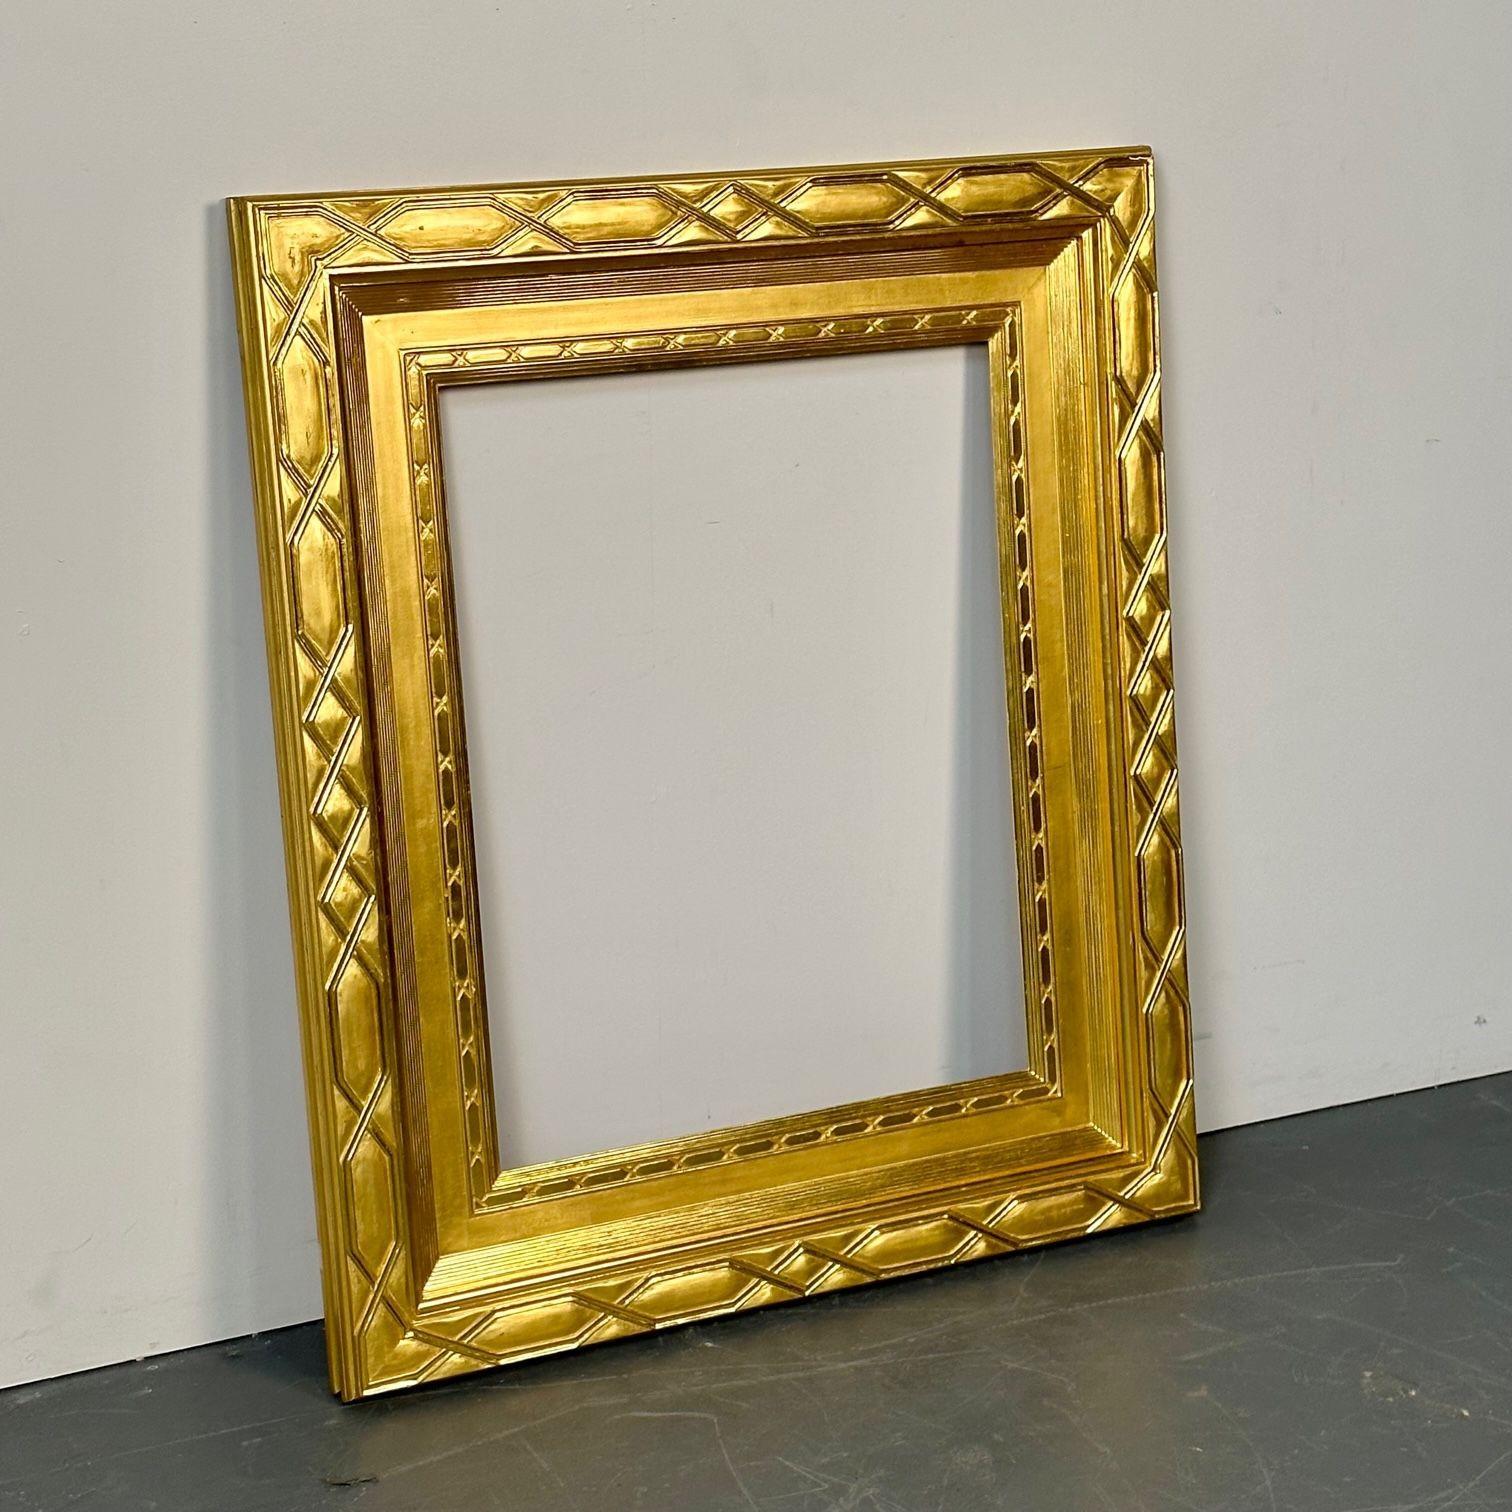 Custom Hollywood Regency Style Carved Giltwood Mirror / Painting Frame
One of a small collection of finely Gilt wood Wall or Console, Painting frames. This one with fine carvings. 
Exterior:  41.25H x 35.25W x 2.25D  Aperture:  27.75 x 21.75
gxa